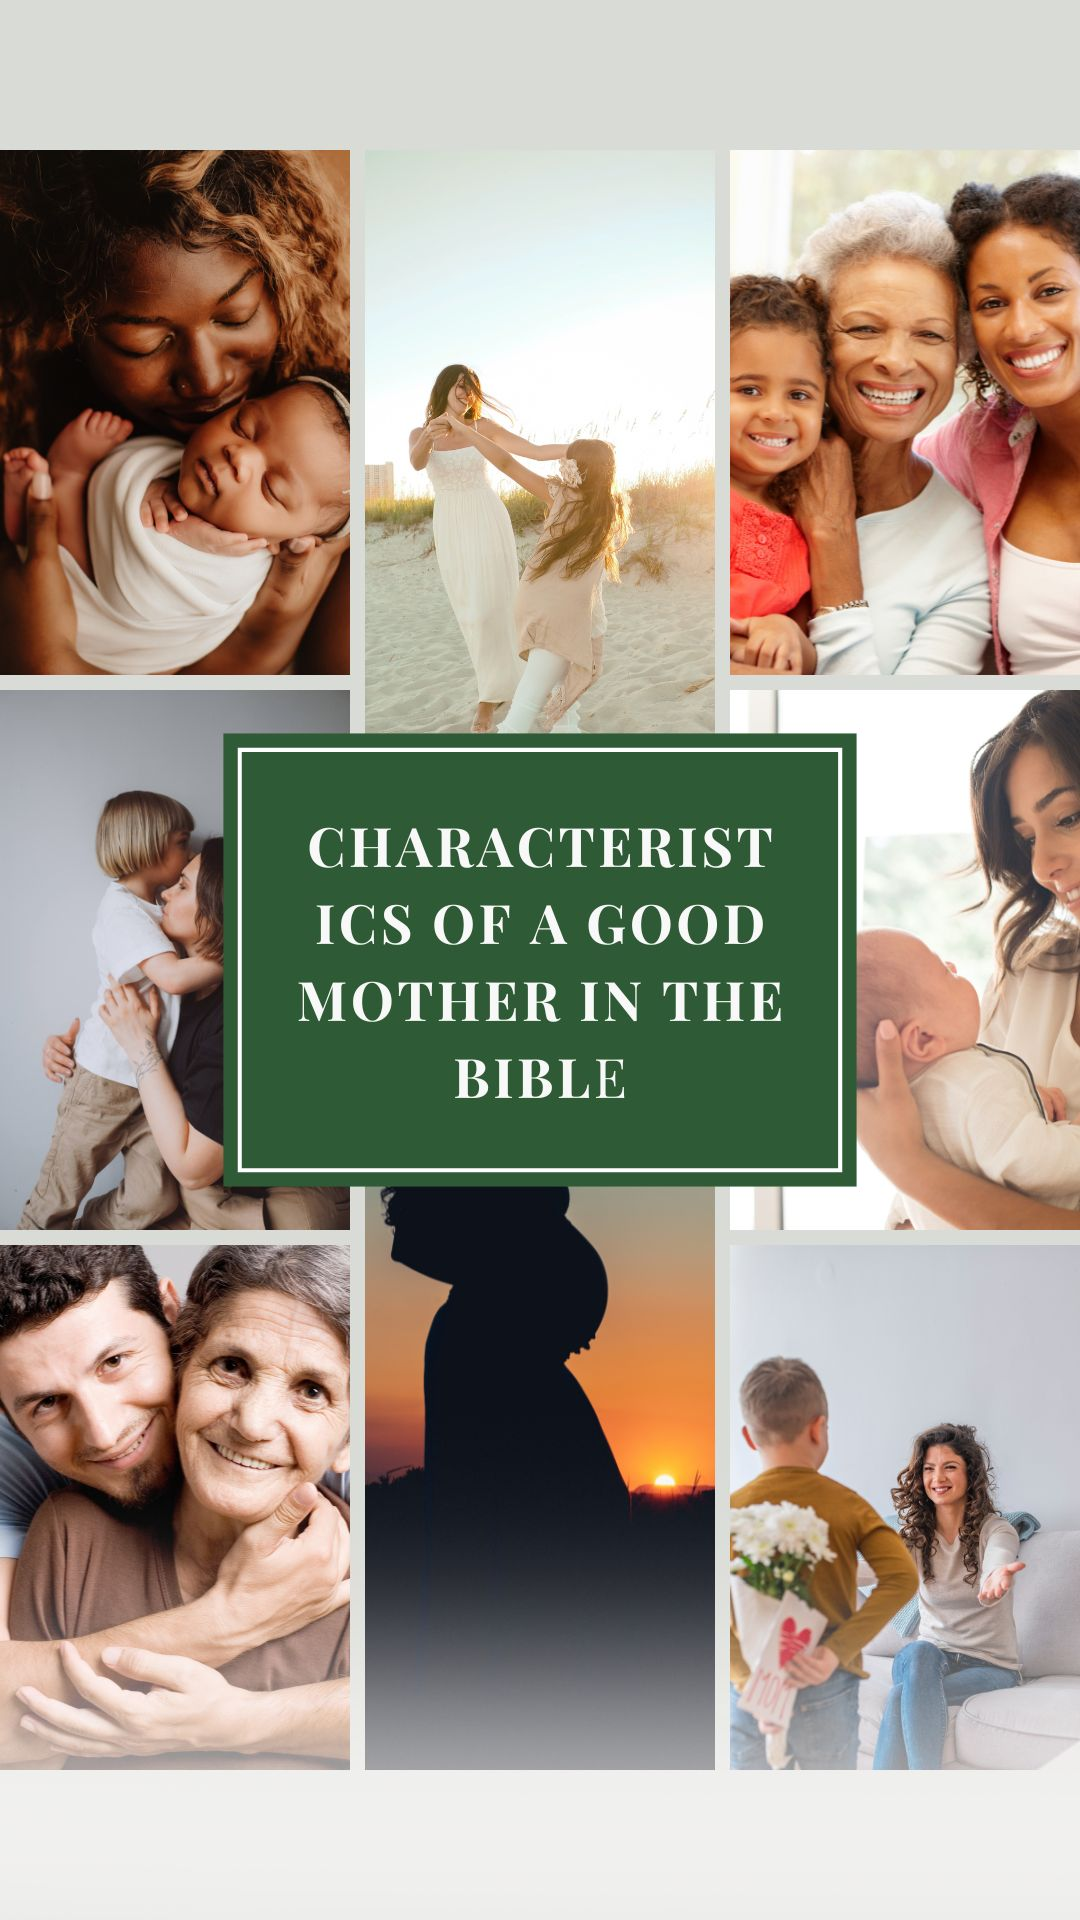 12 qualities of good mother according to the Bible 